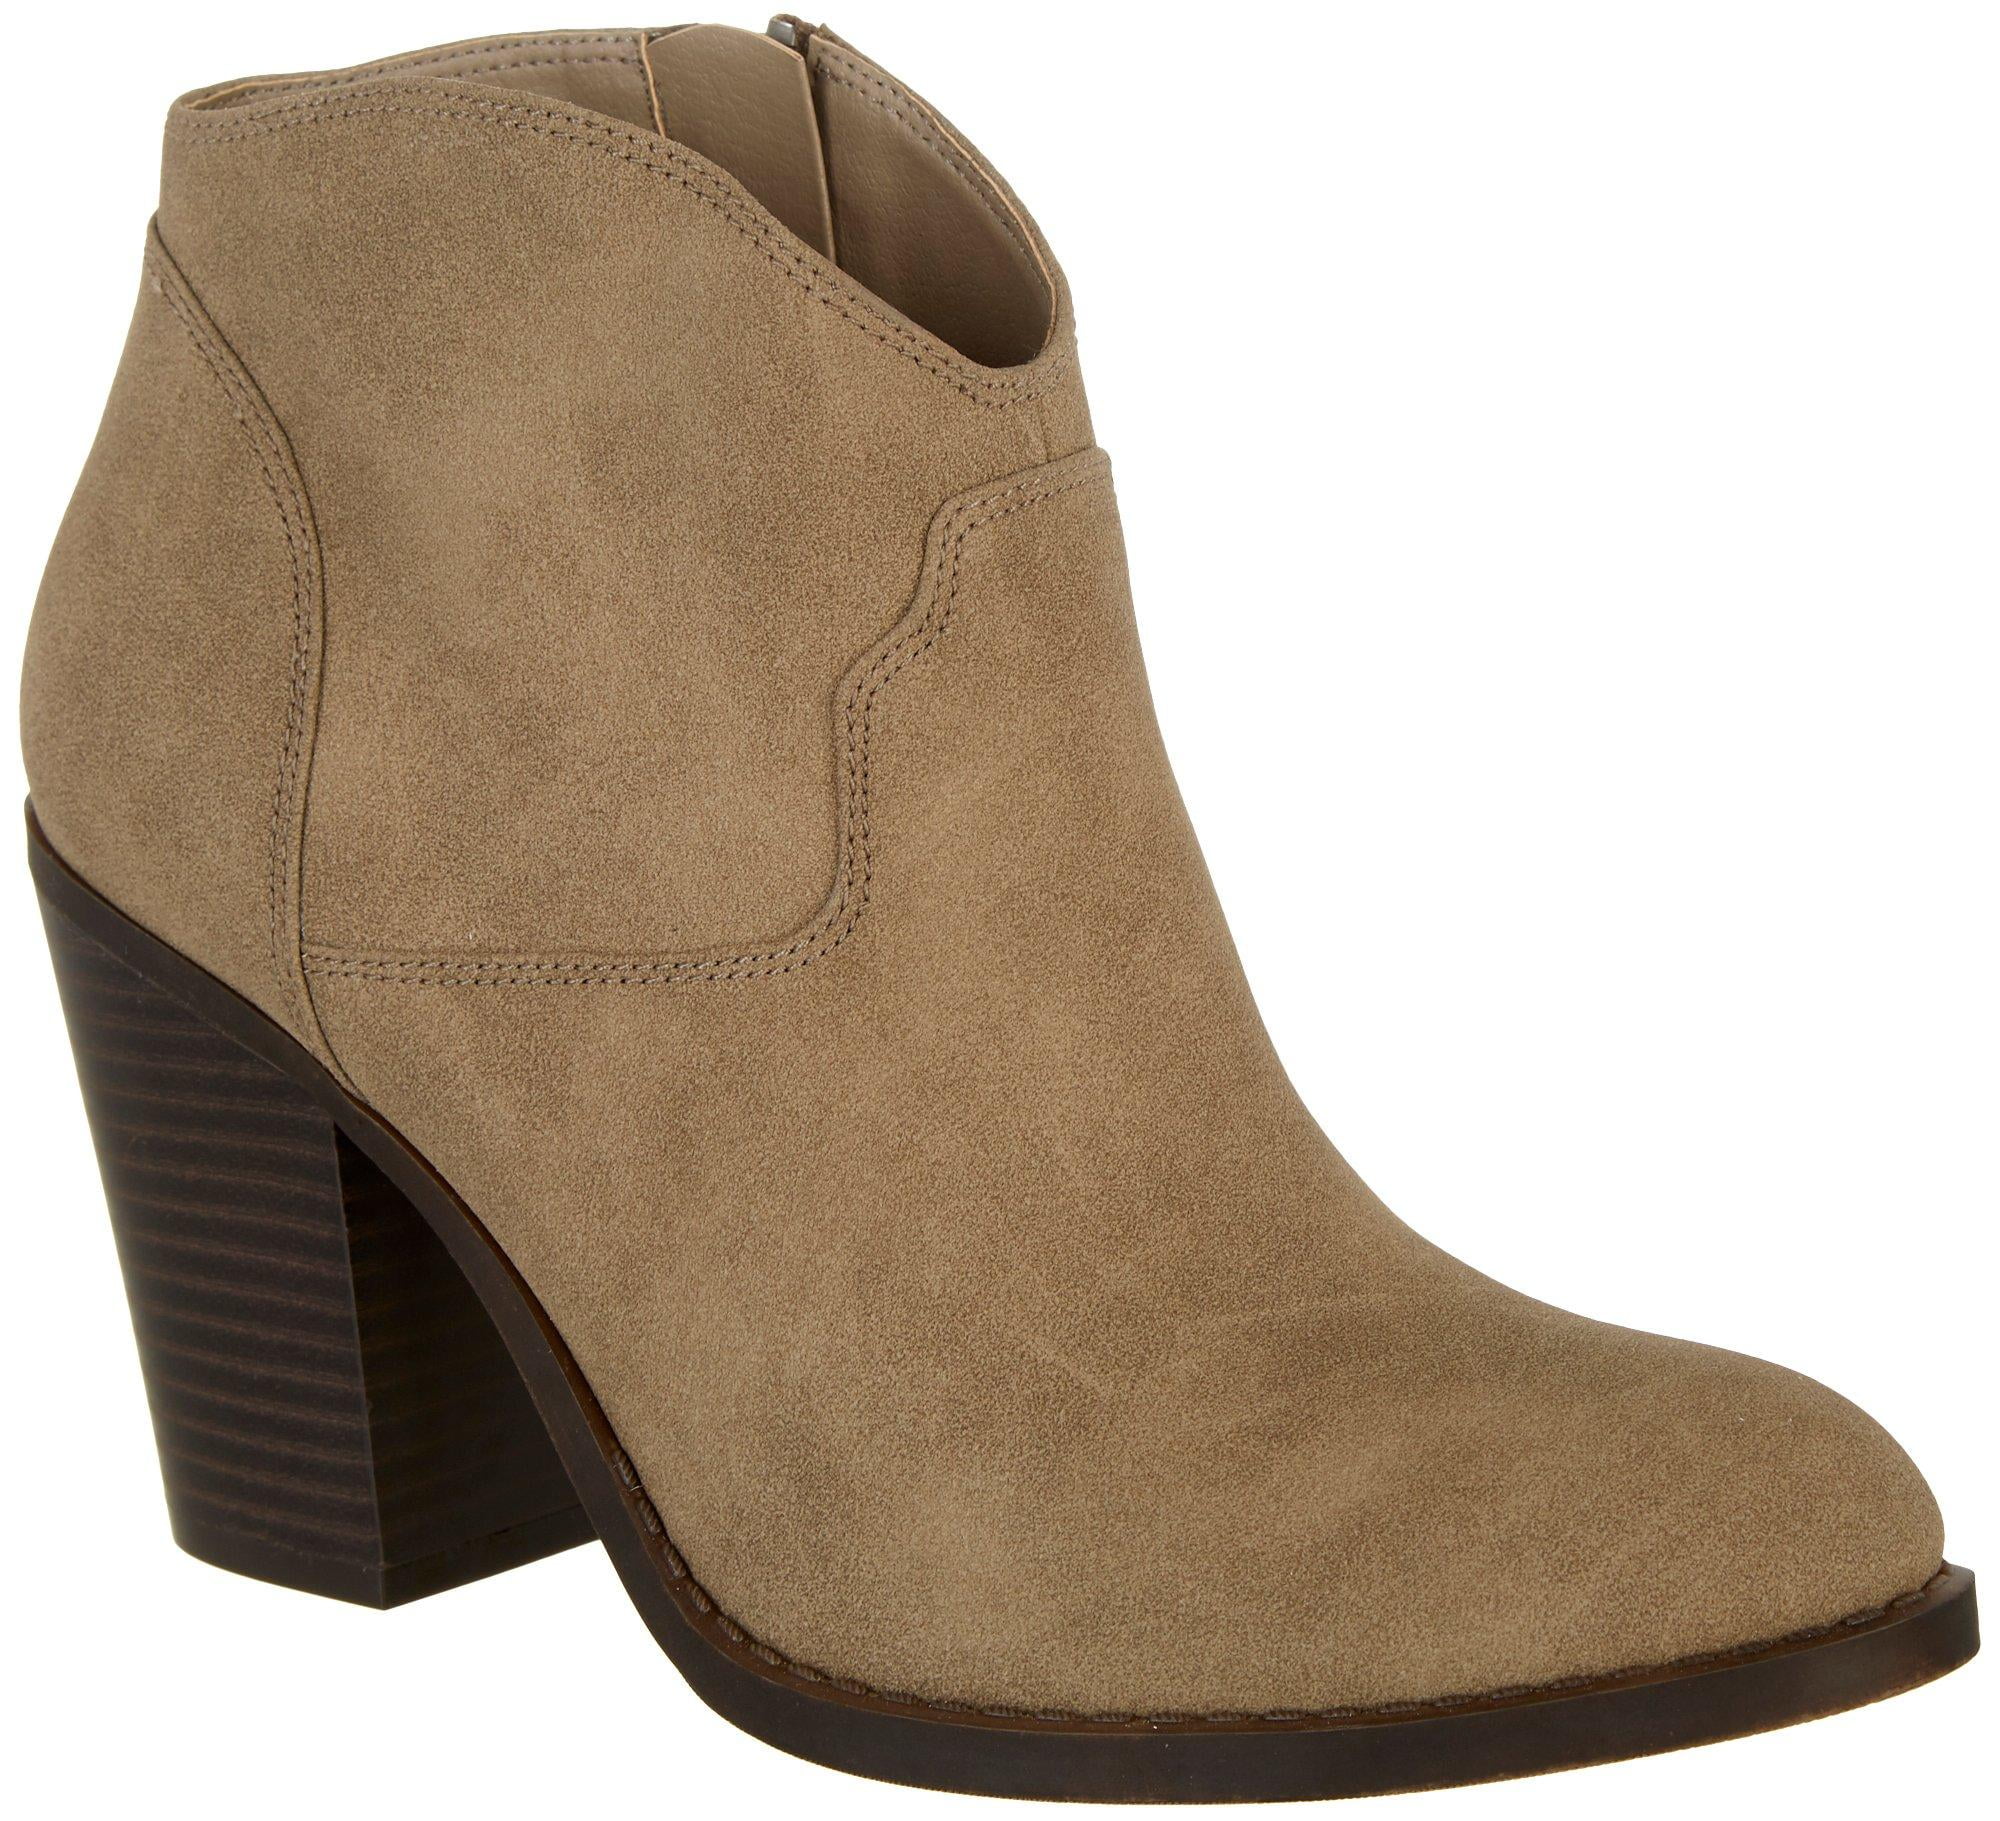 xoxo ankle boots